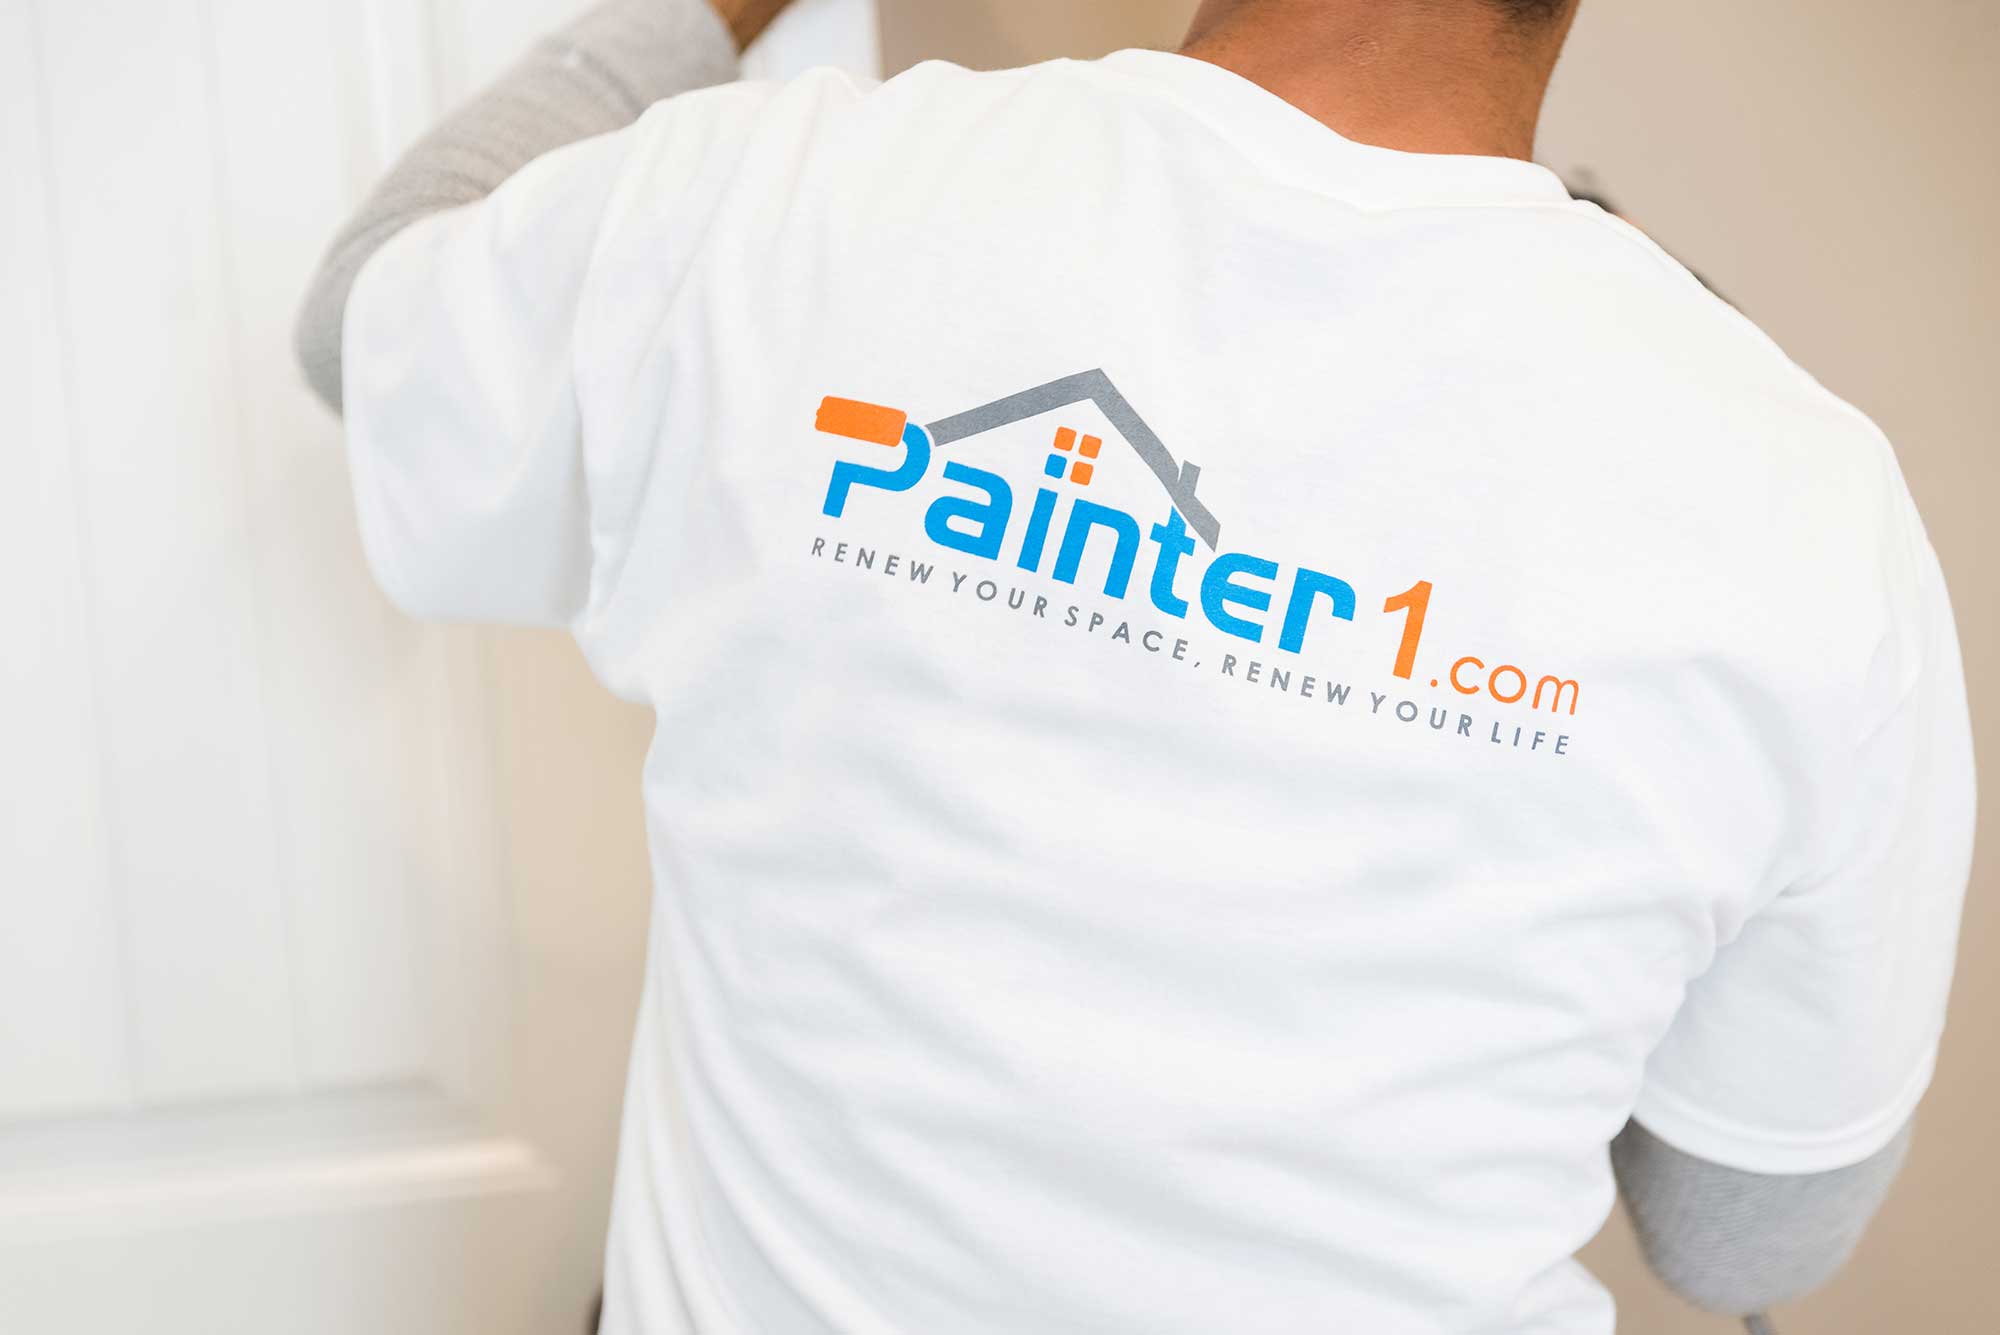 If you are searching for wallpaper removal in Malvern / Chester County, Painter1 offers professional wallpaper removal in Malvern / Chester County.